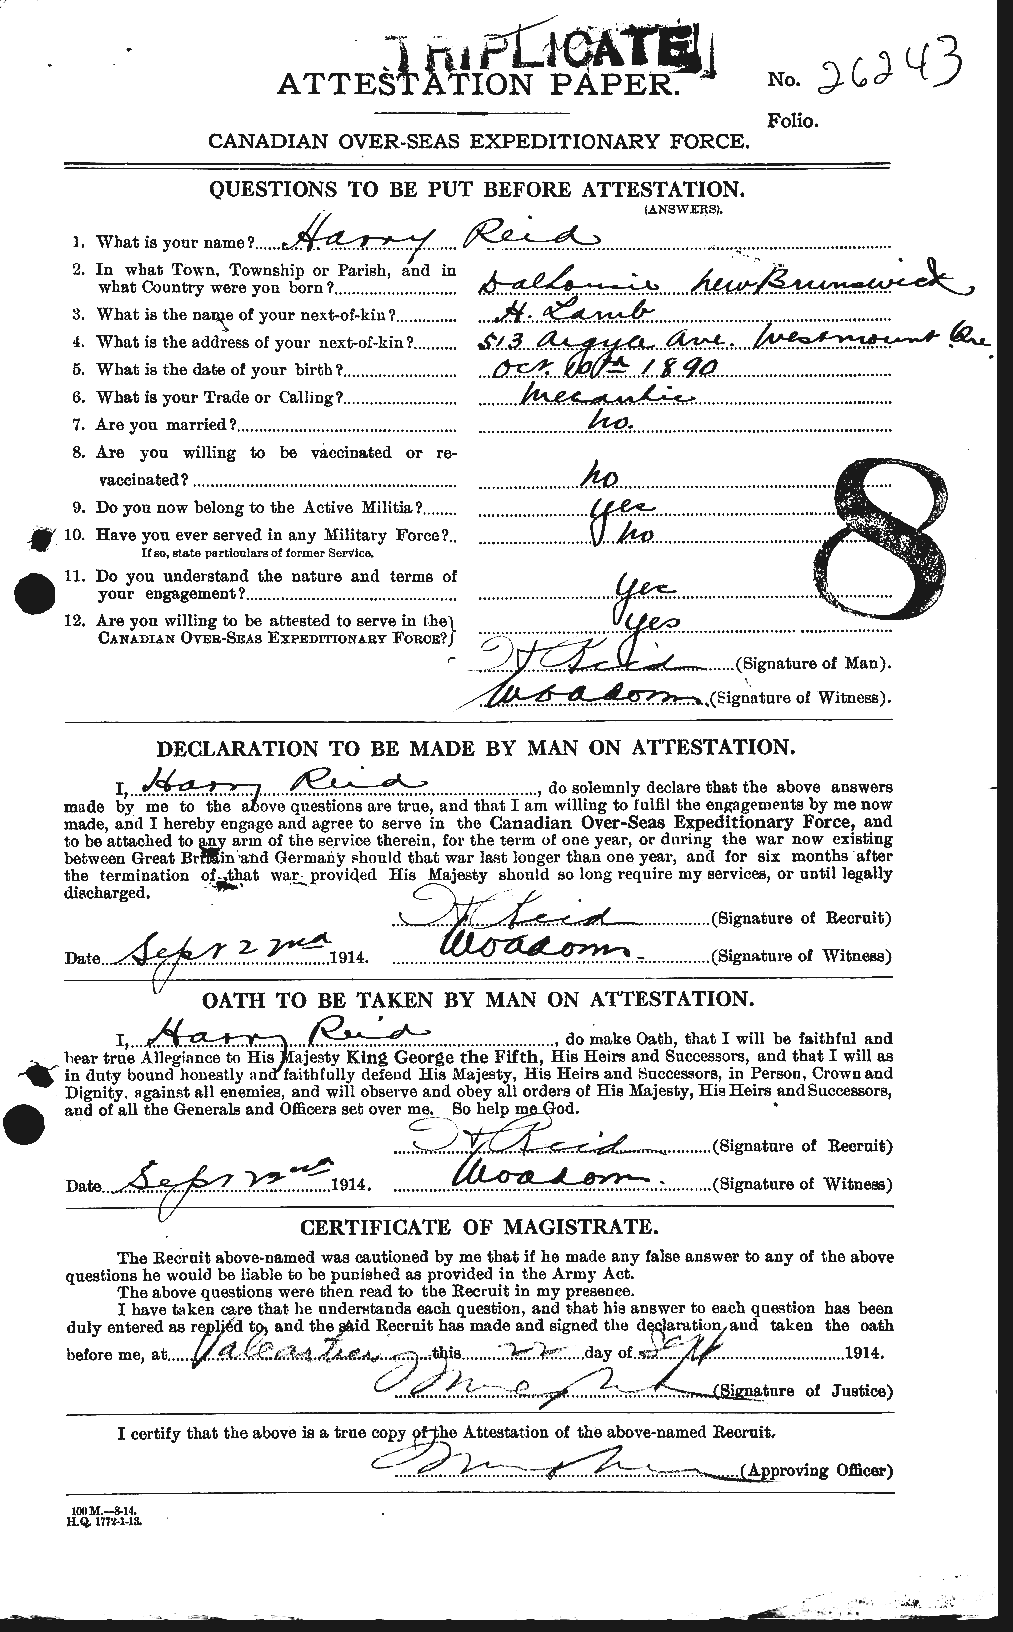 Personnel Records of the First World War - CEF 598578a